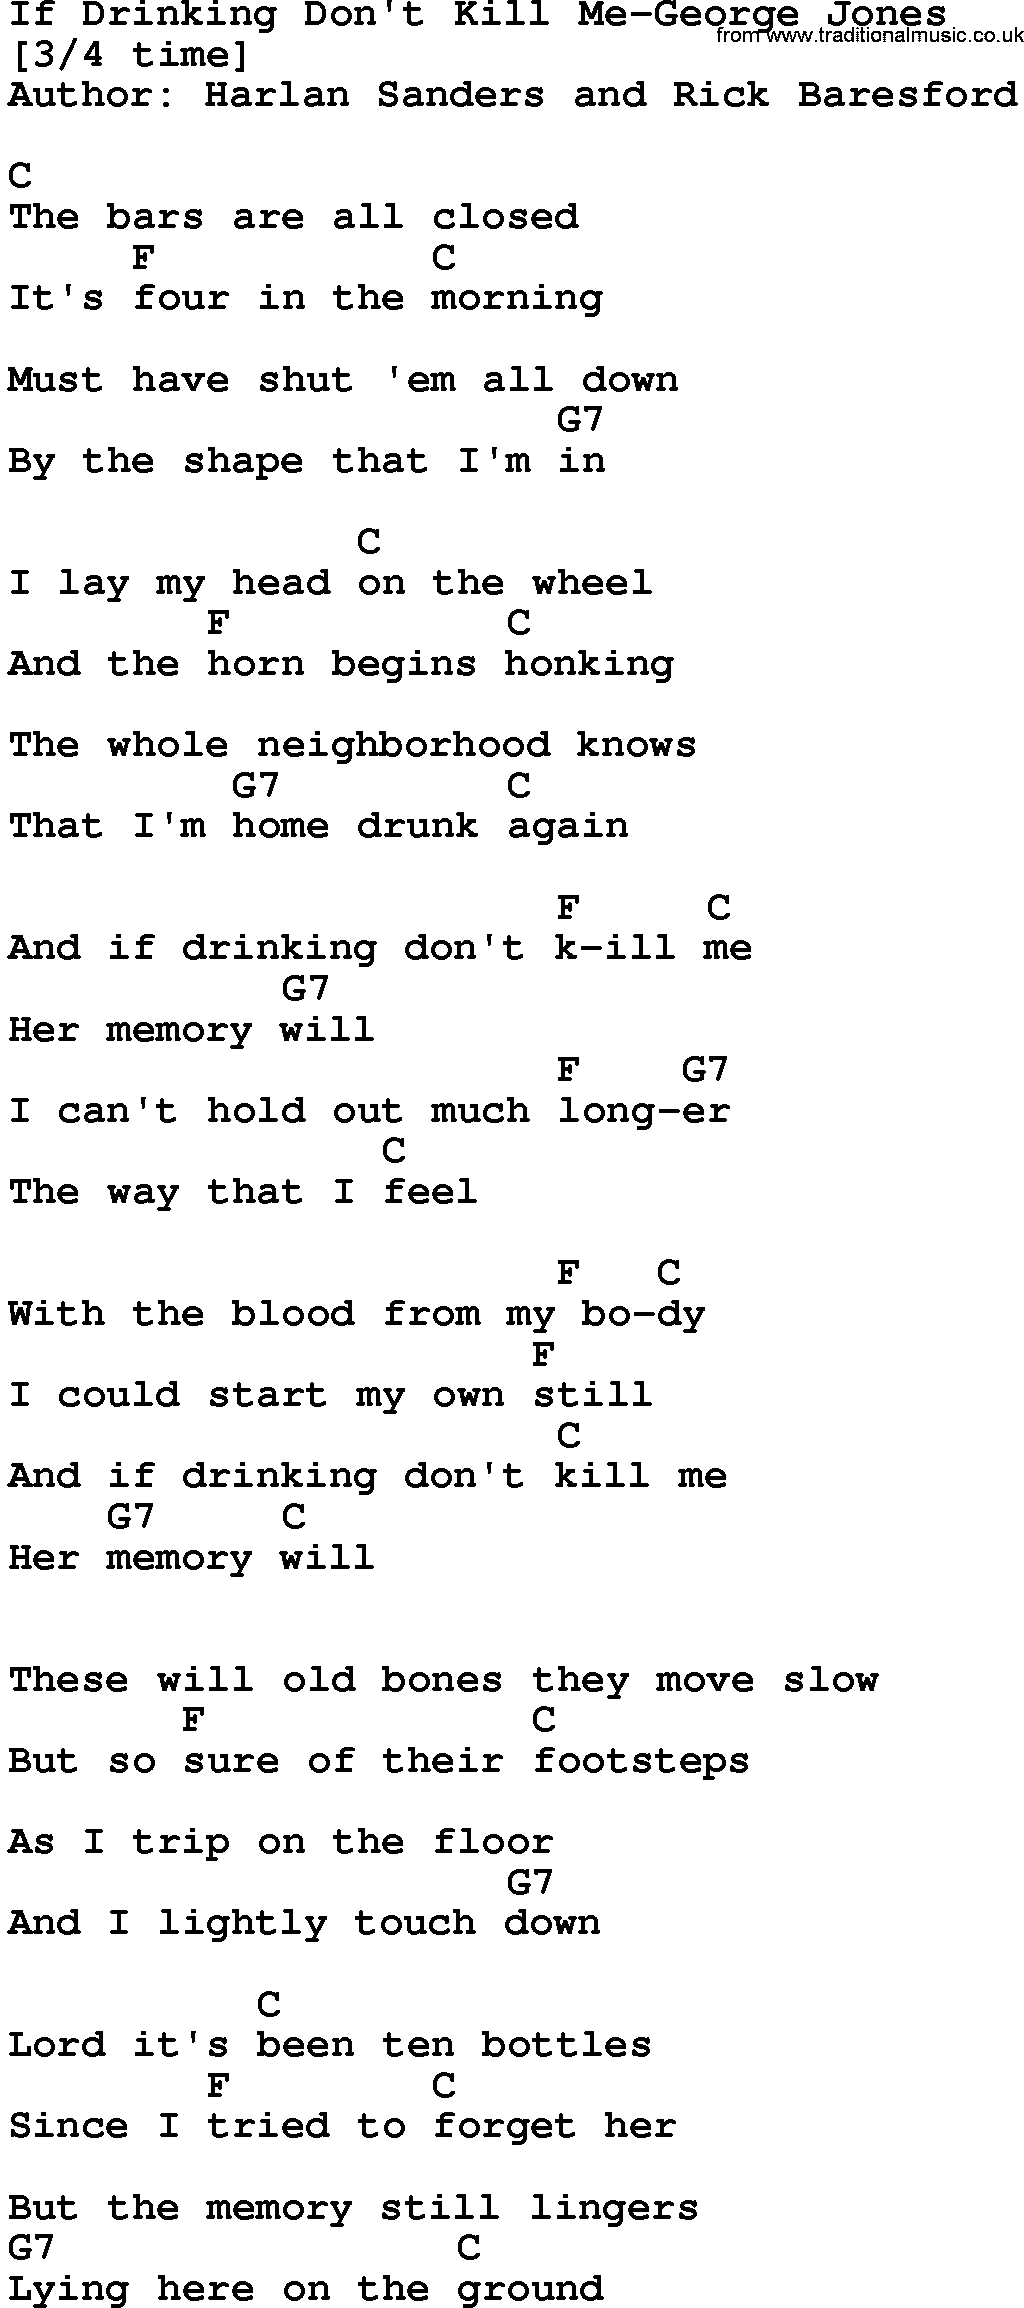 Country music song: If Drinking Don't Kill Me-George Jones lyrics and chords